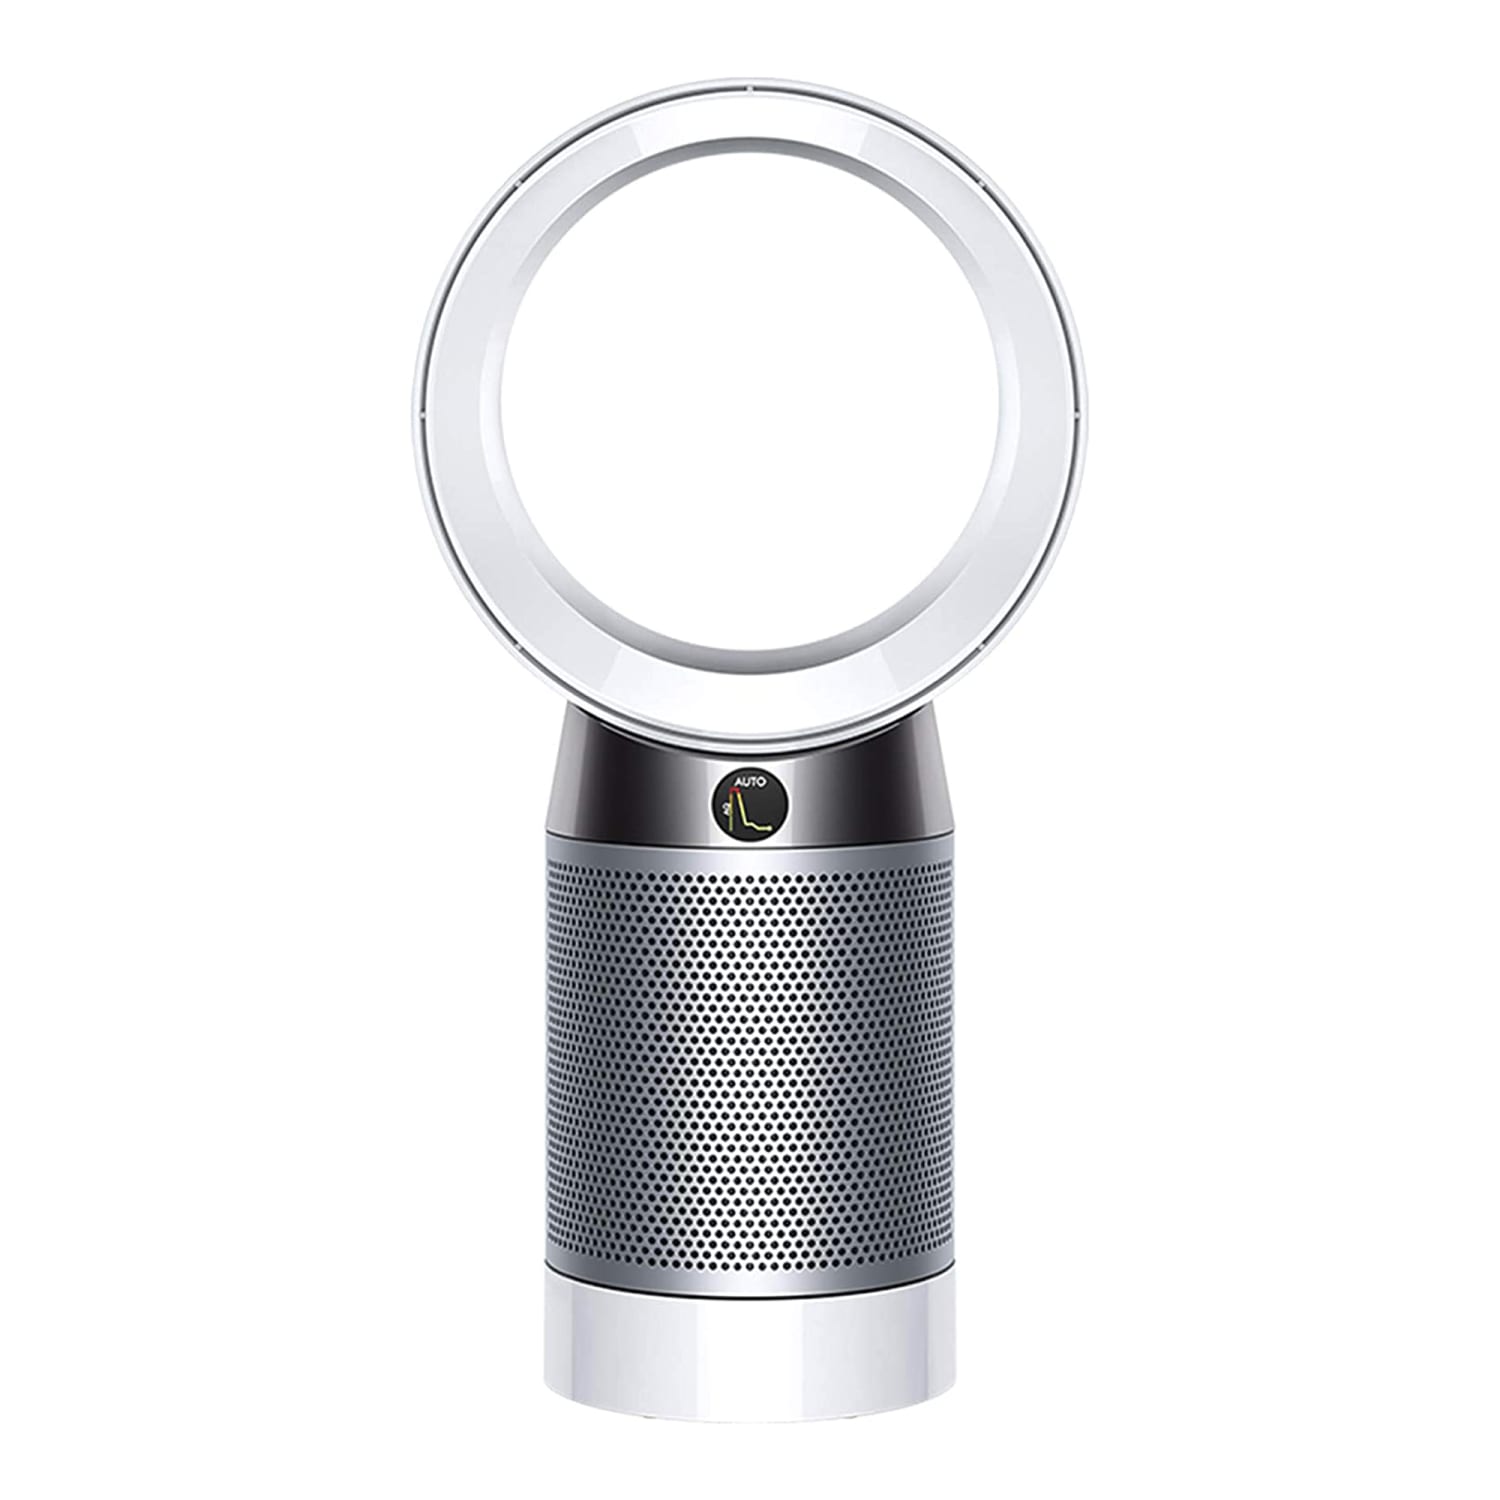 Dyson air recommendations and shopping guide for